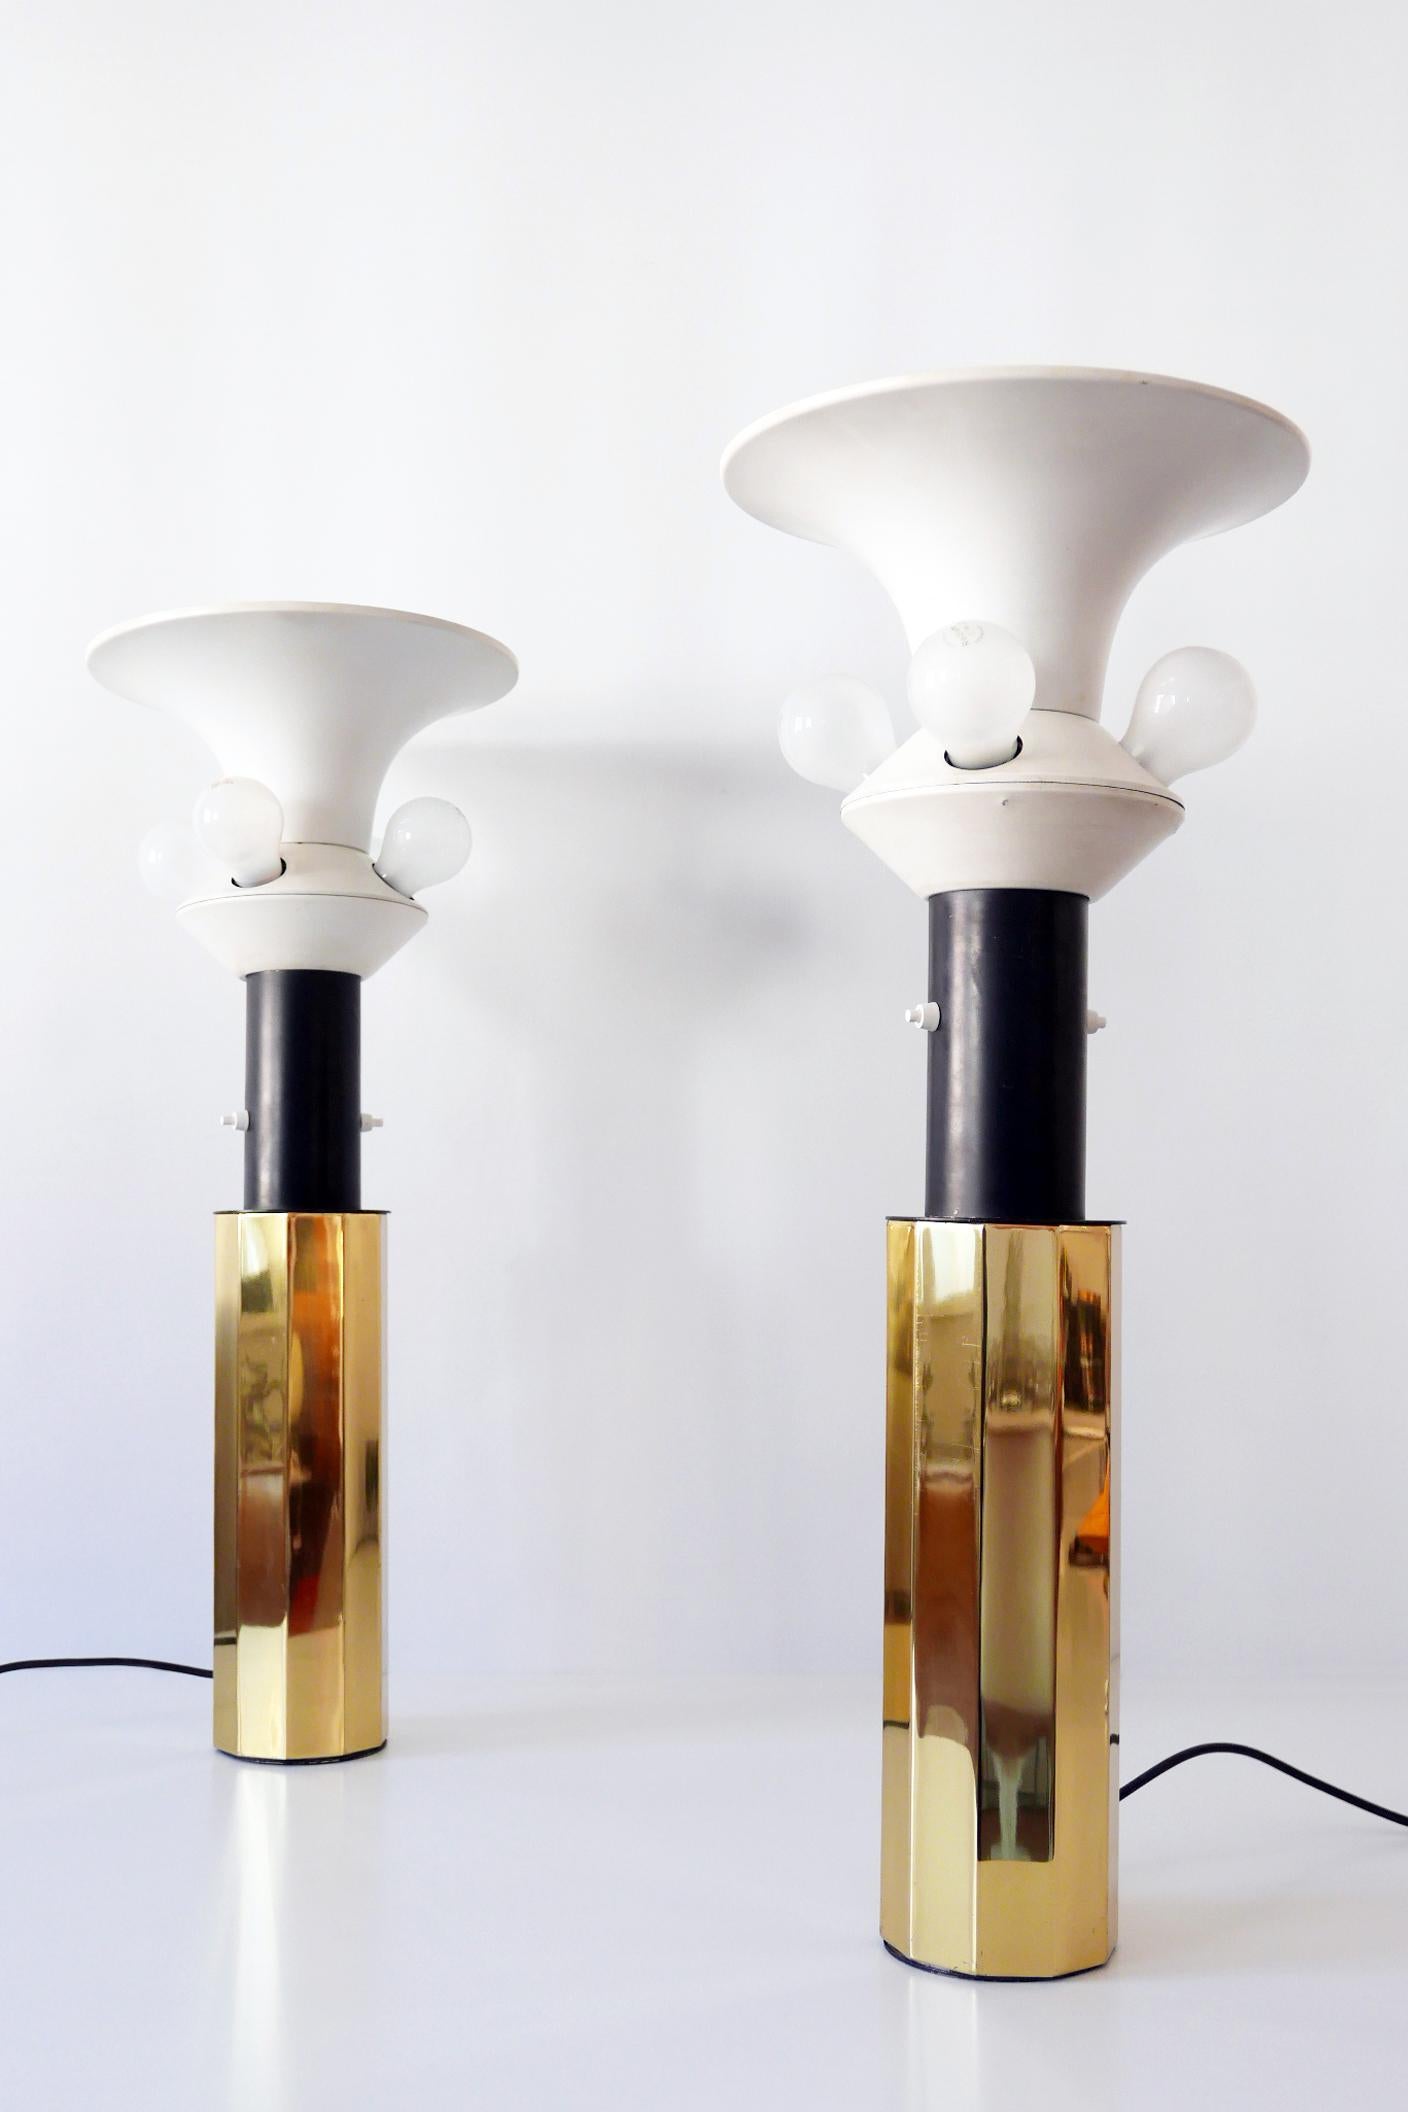 Set of Two Huge, 5-Flamed Midcentury Decagonal Brass Table Lamps, 1960s, Germany For Sale 4